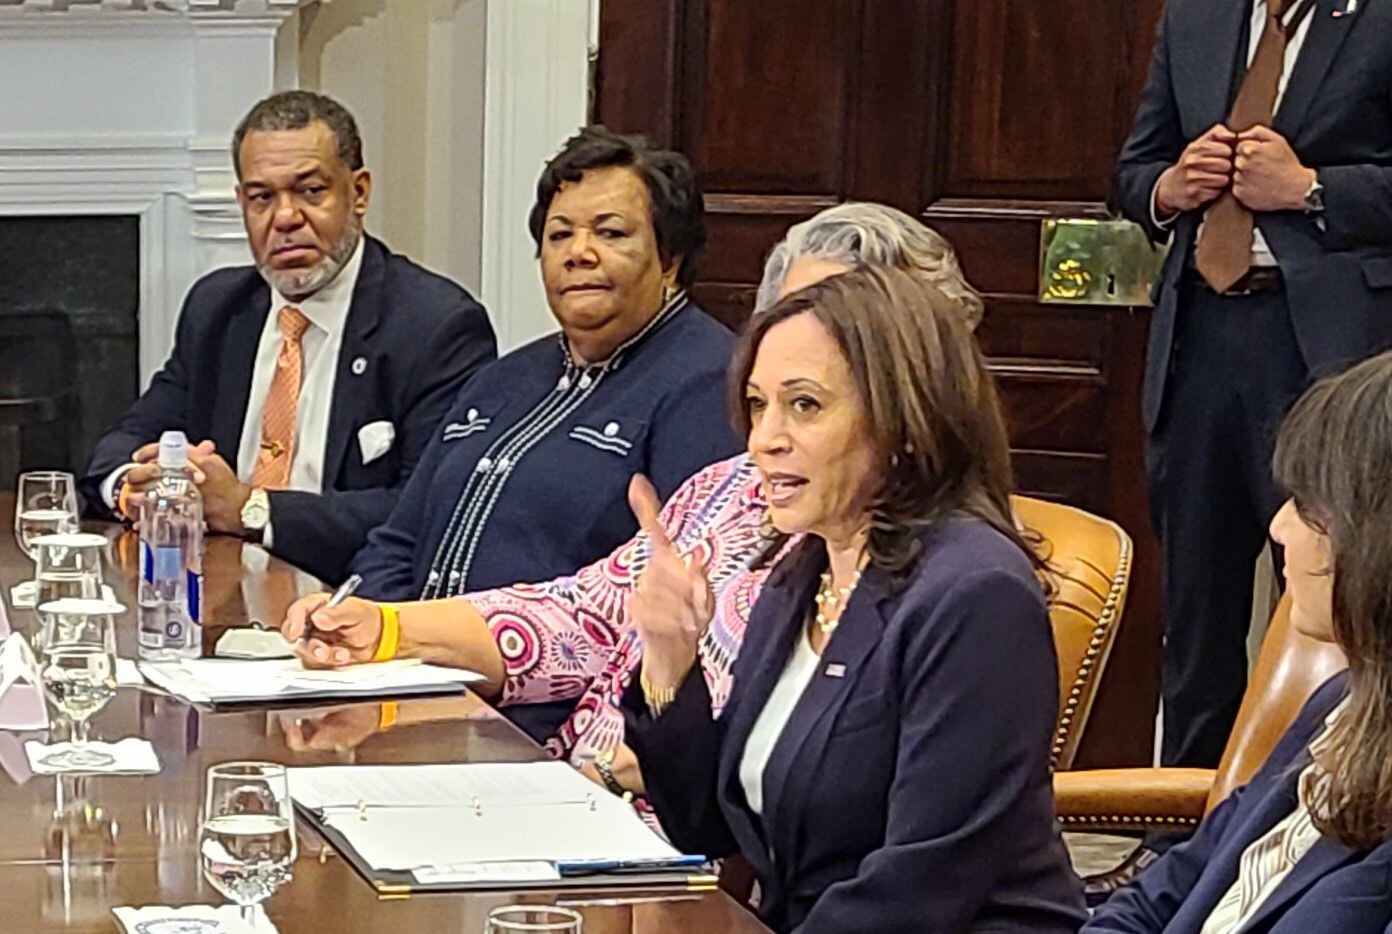 Vice President Kamala Harris meets with Texas state lawmakers at the White House on June 16,...